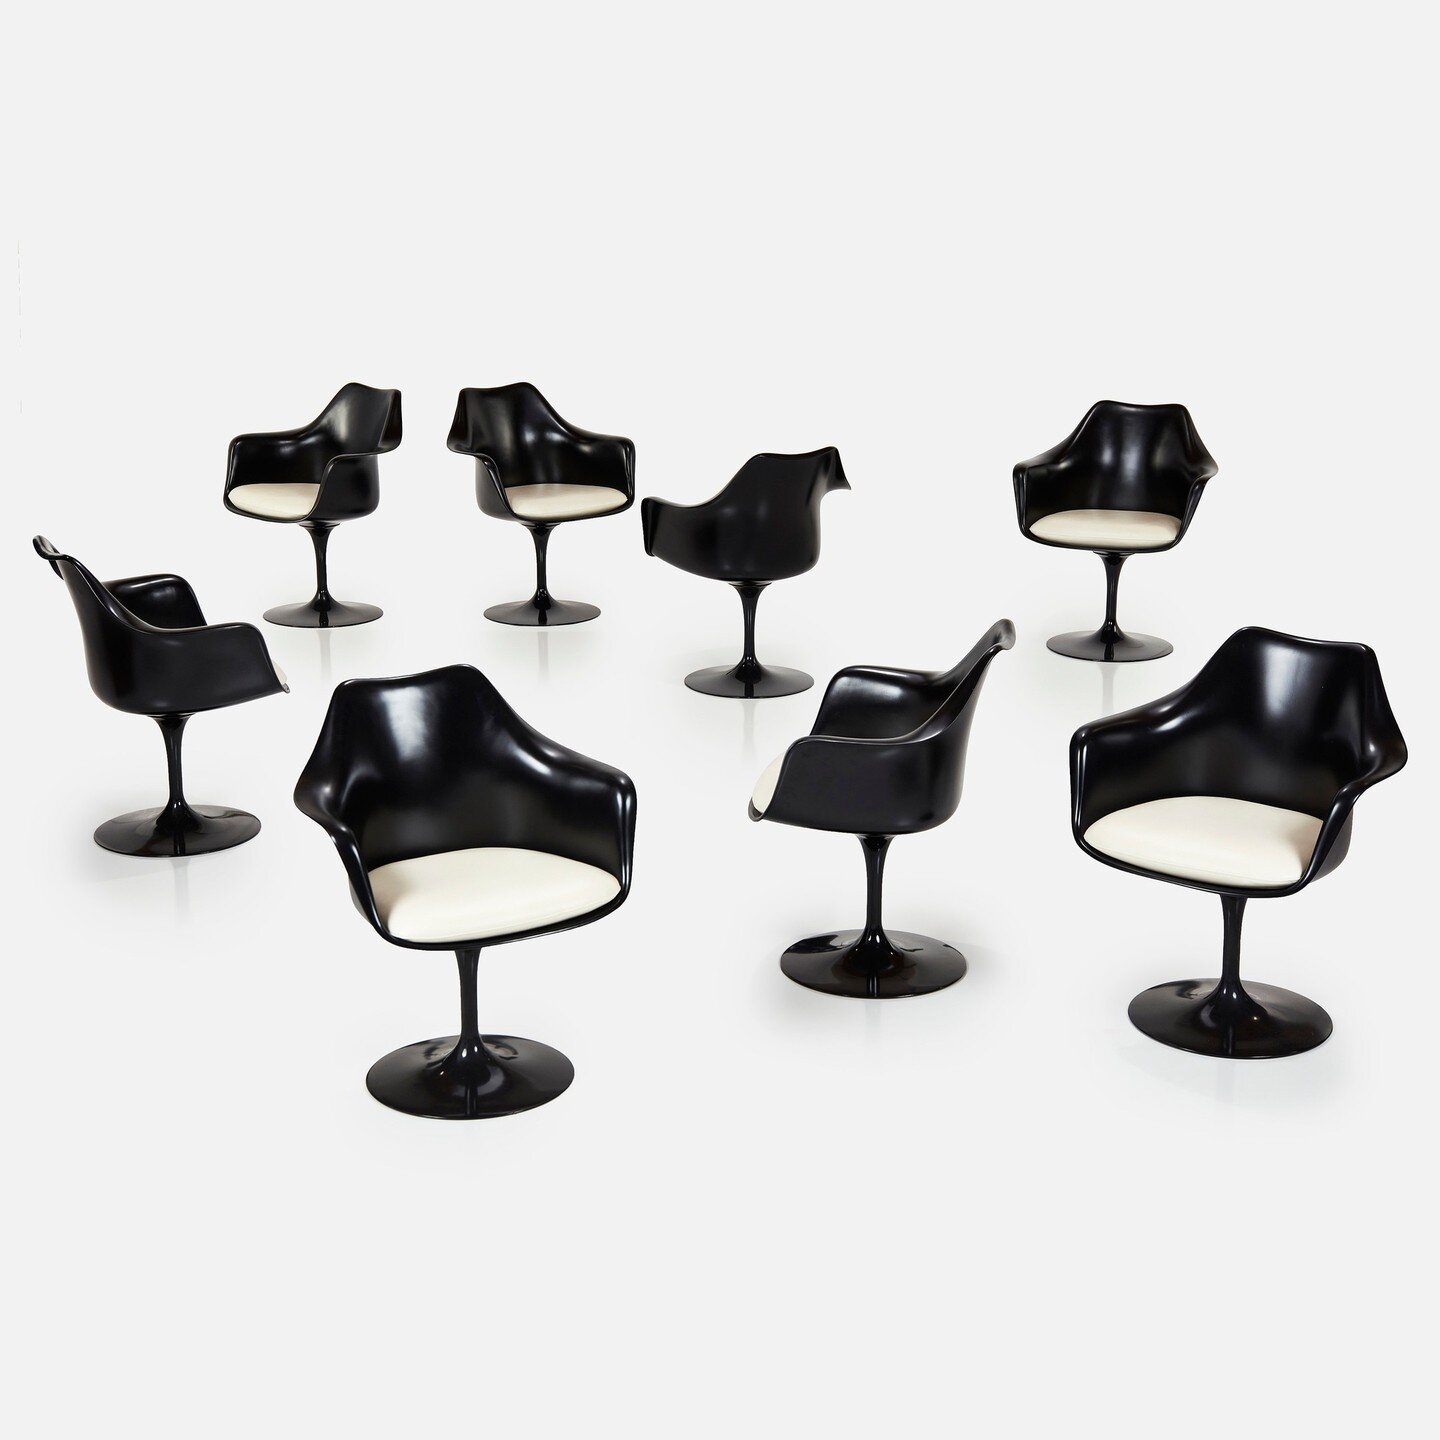 Eero Saarinen, Set of Eight 'Tulip' Armchairs⁠
🌷⁠
Coming soon to our Spring Modern Art + Design Auction | March 30, 2024